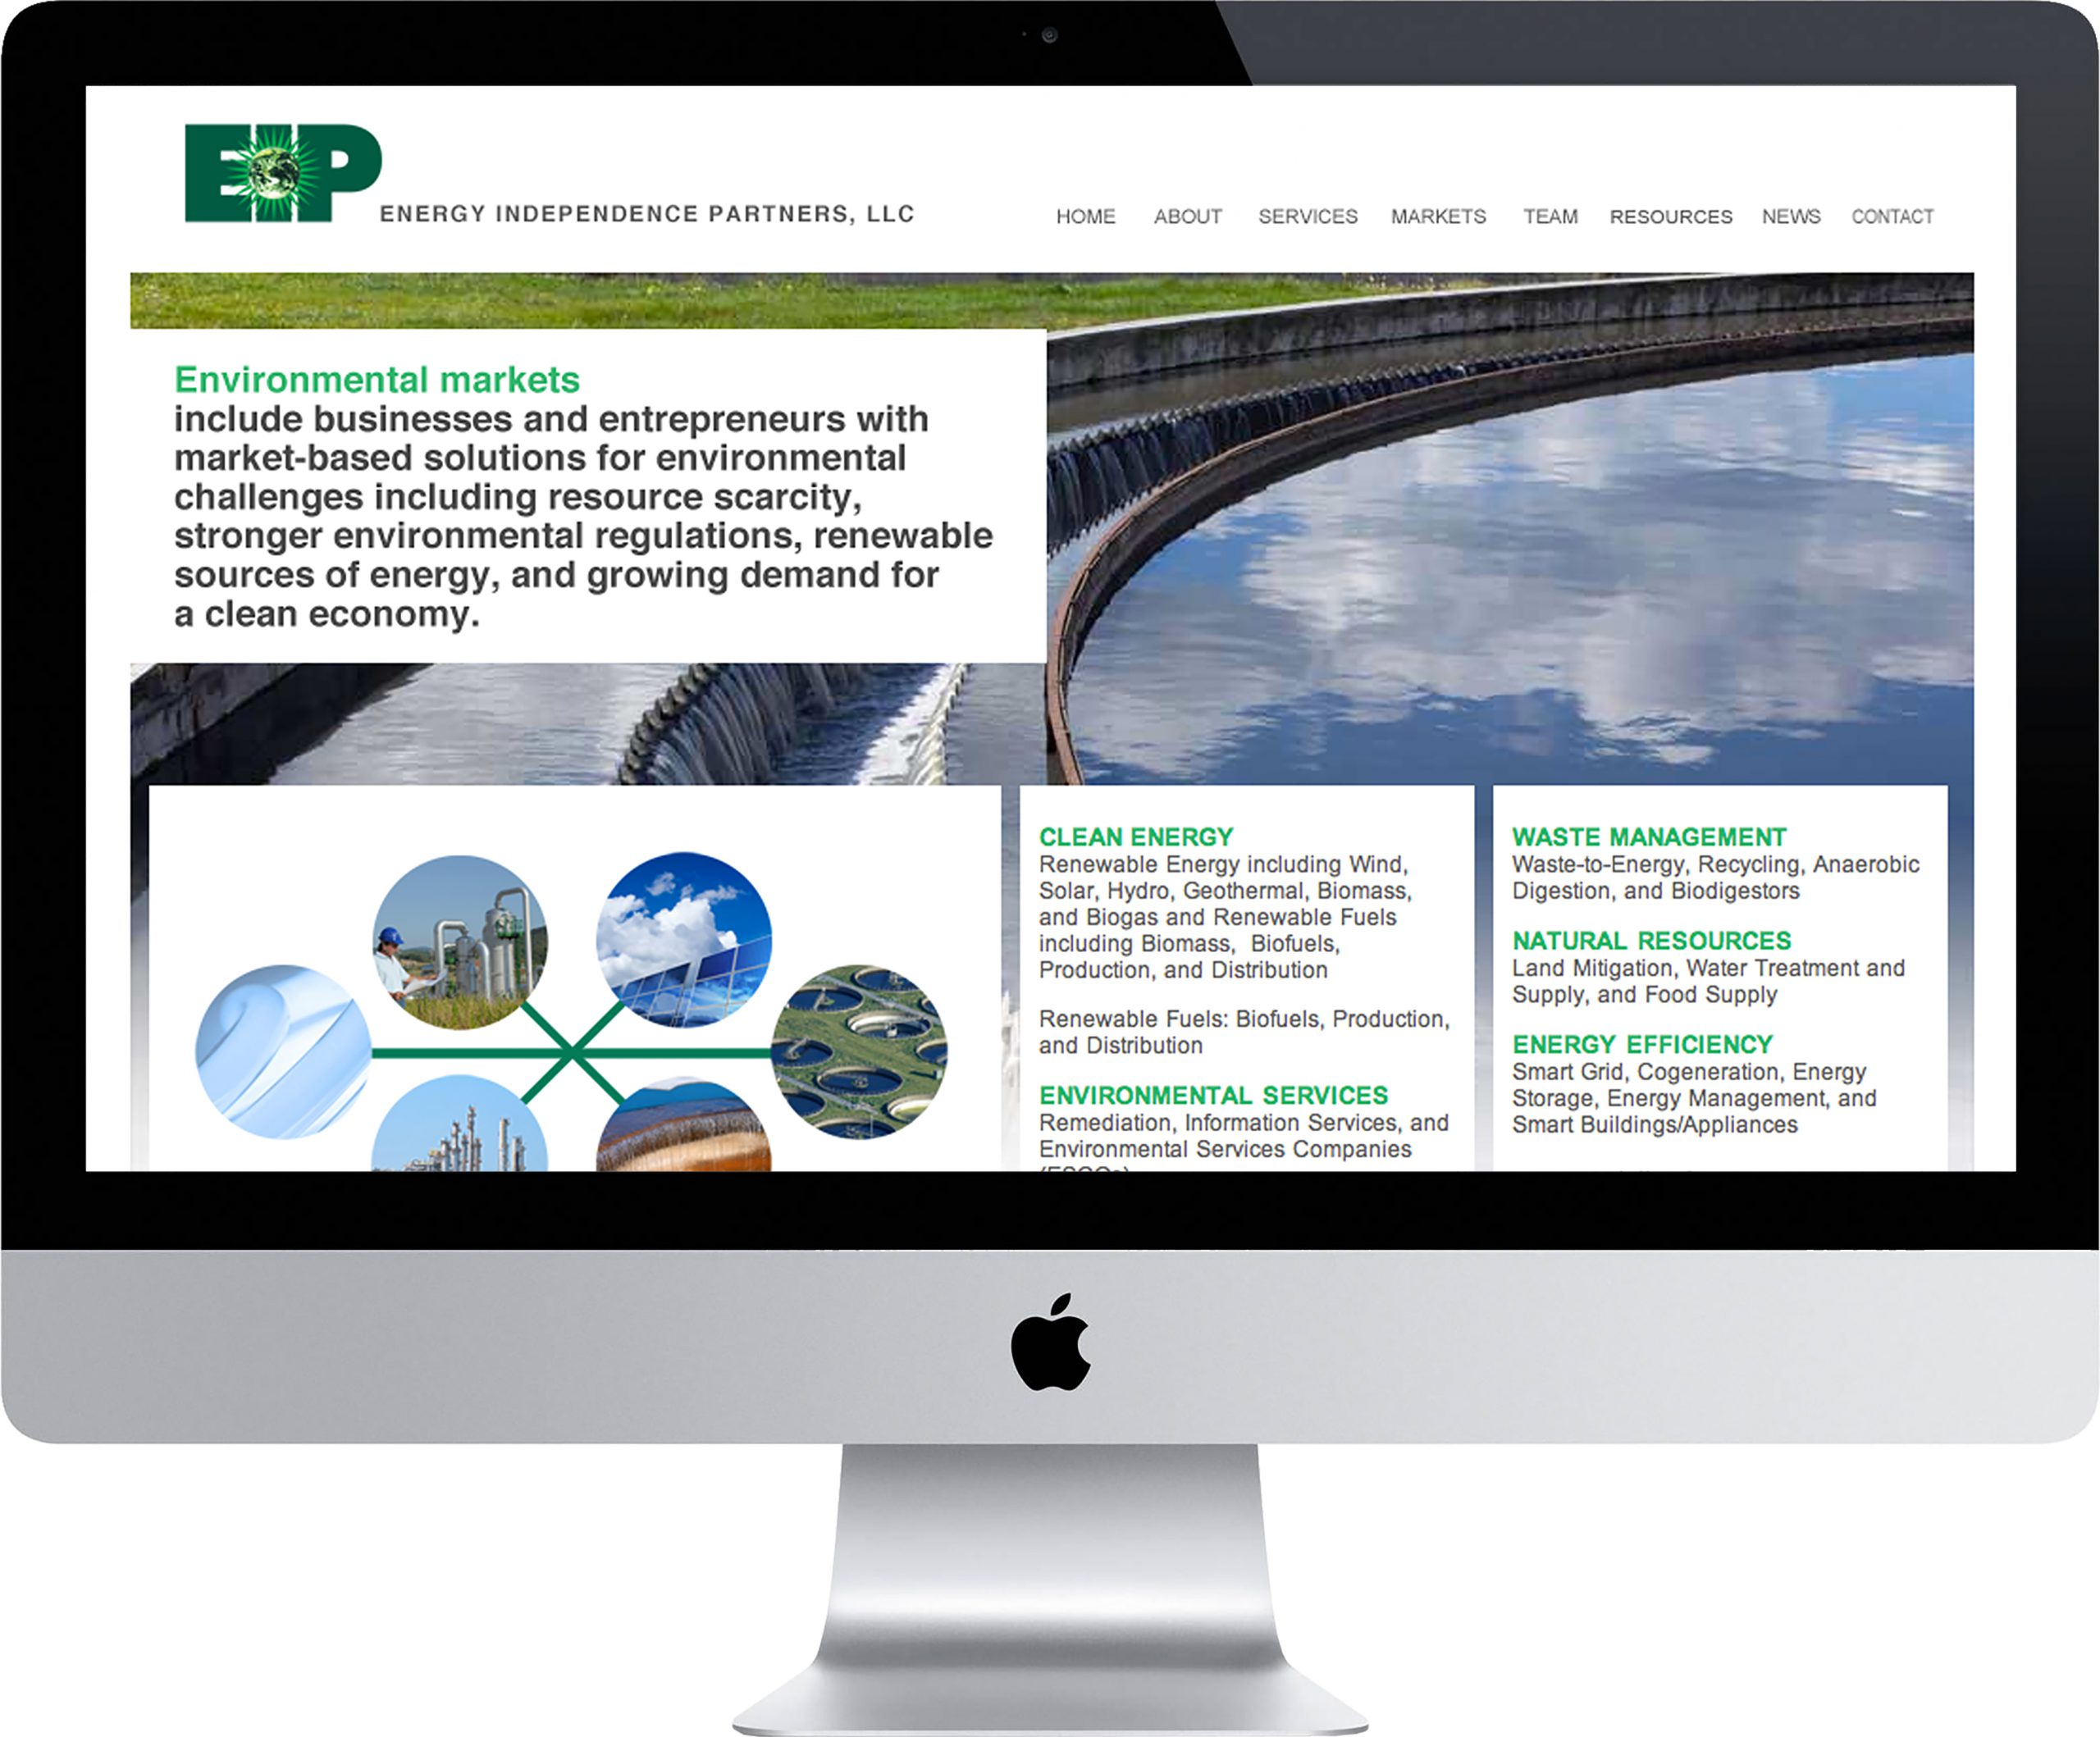 Energy Independence Partners website home page